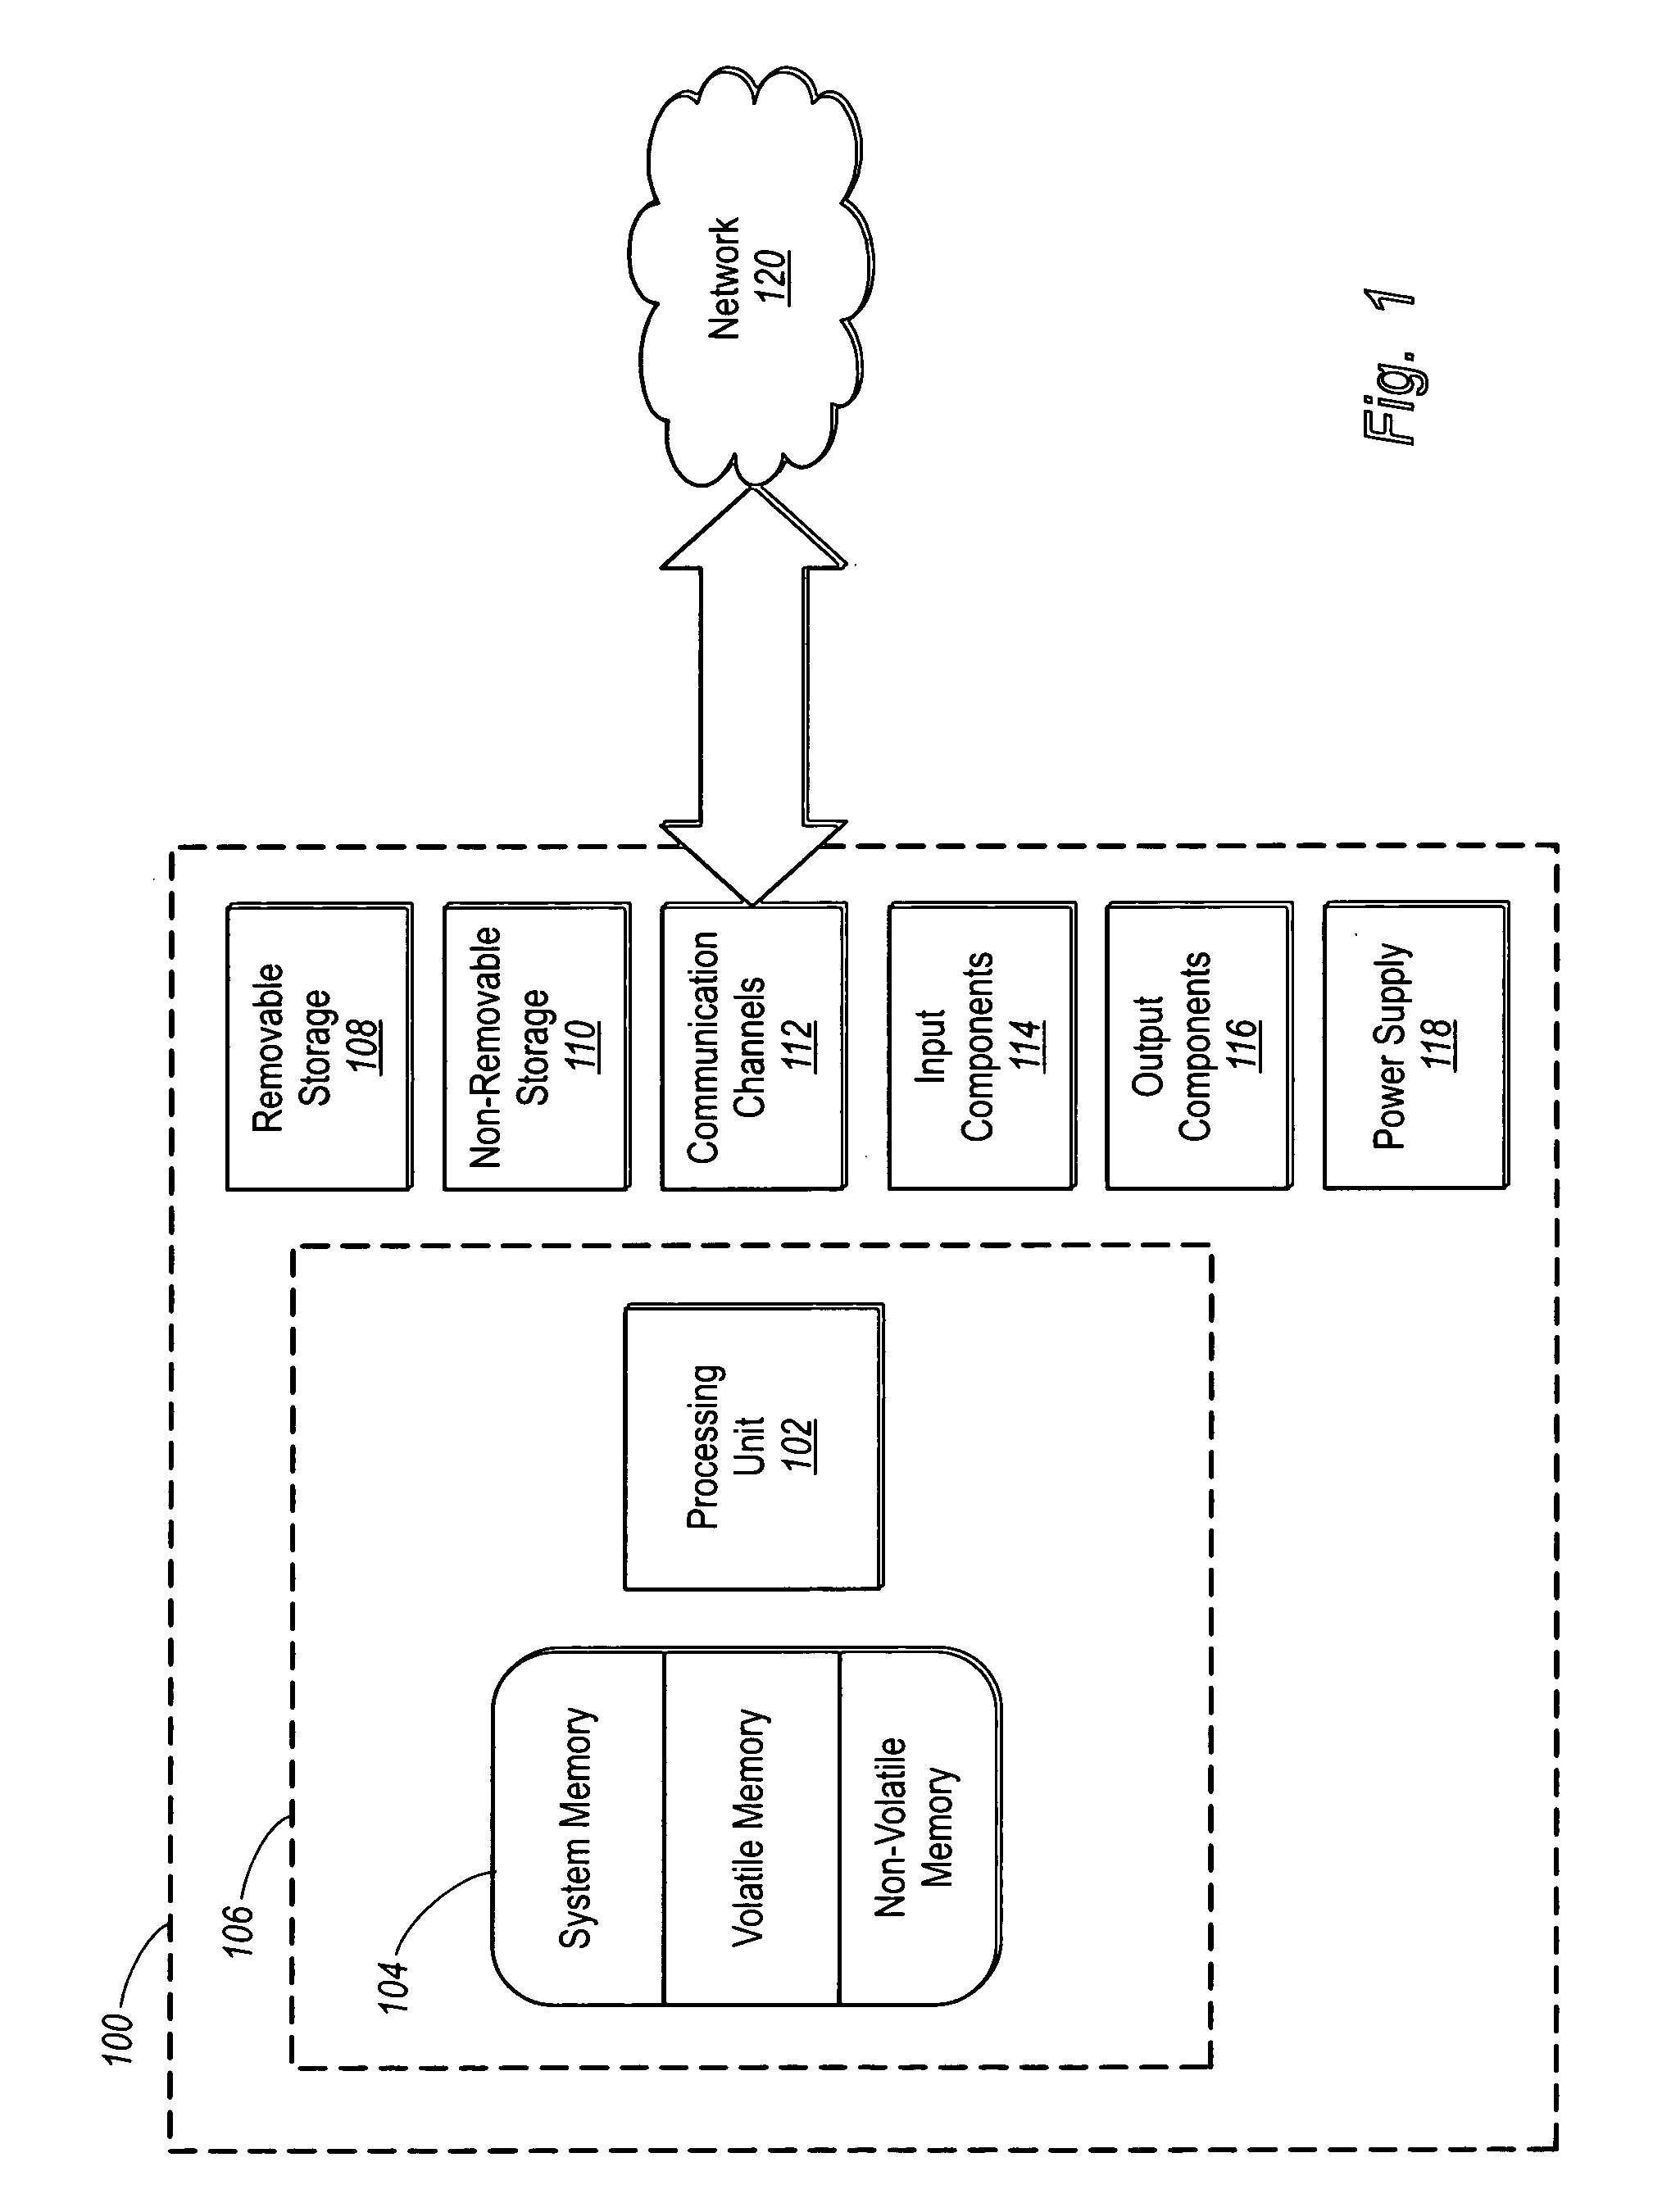 Task execution mechanism with automated condition checking and compensation